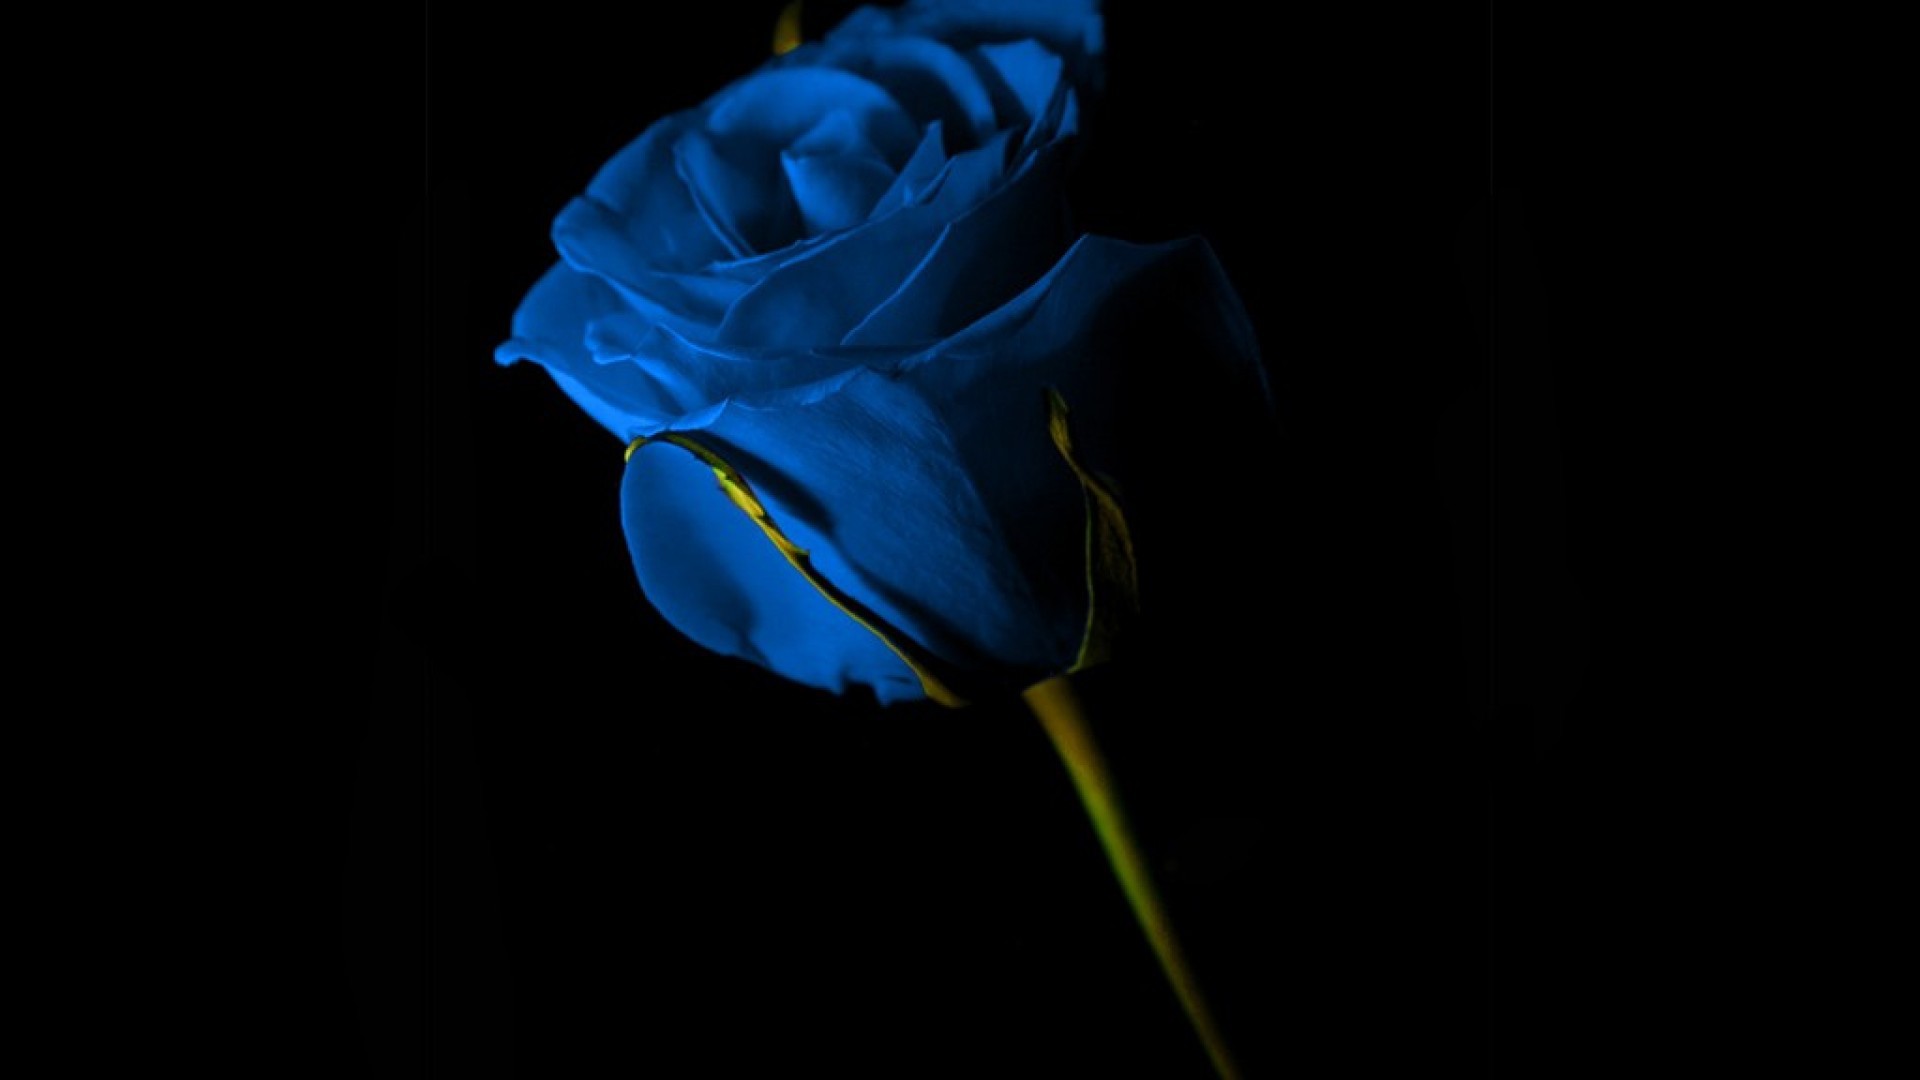 Rose On Black Background Wallpaper And Image Pictures